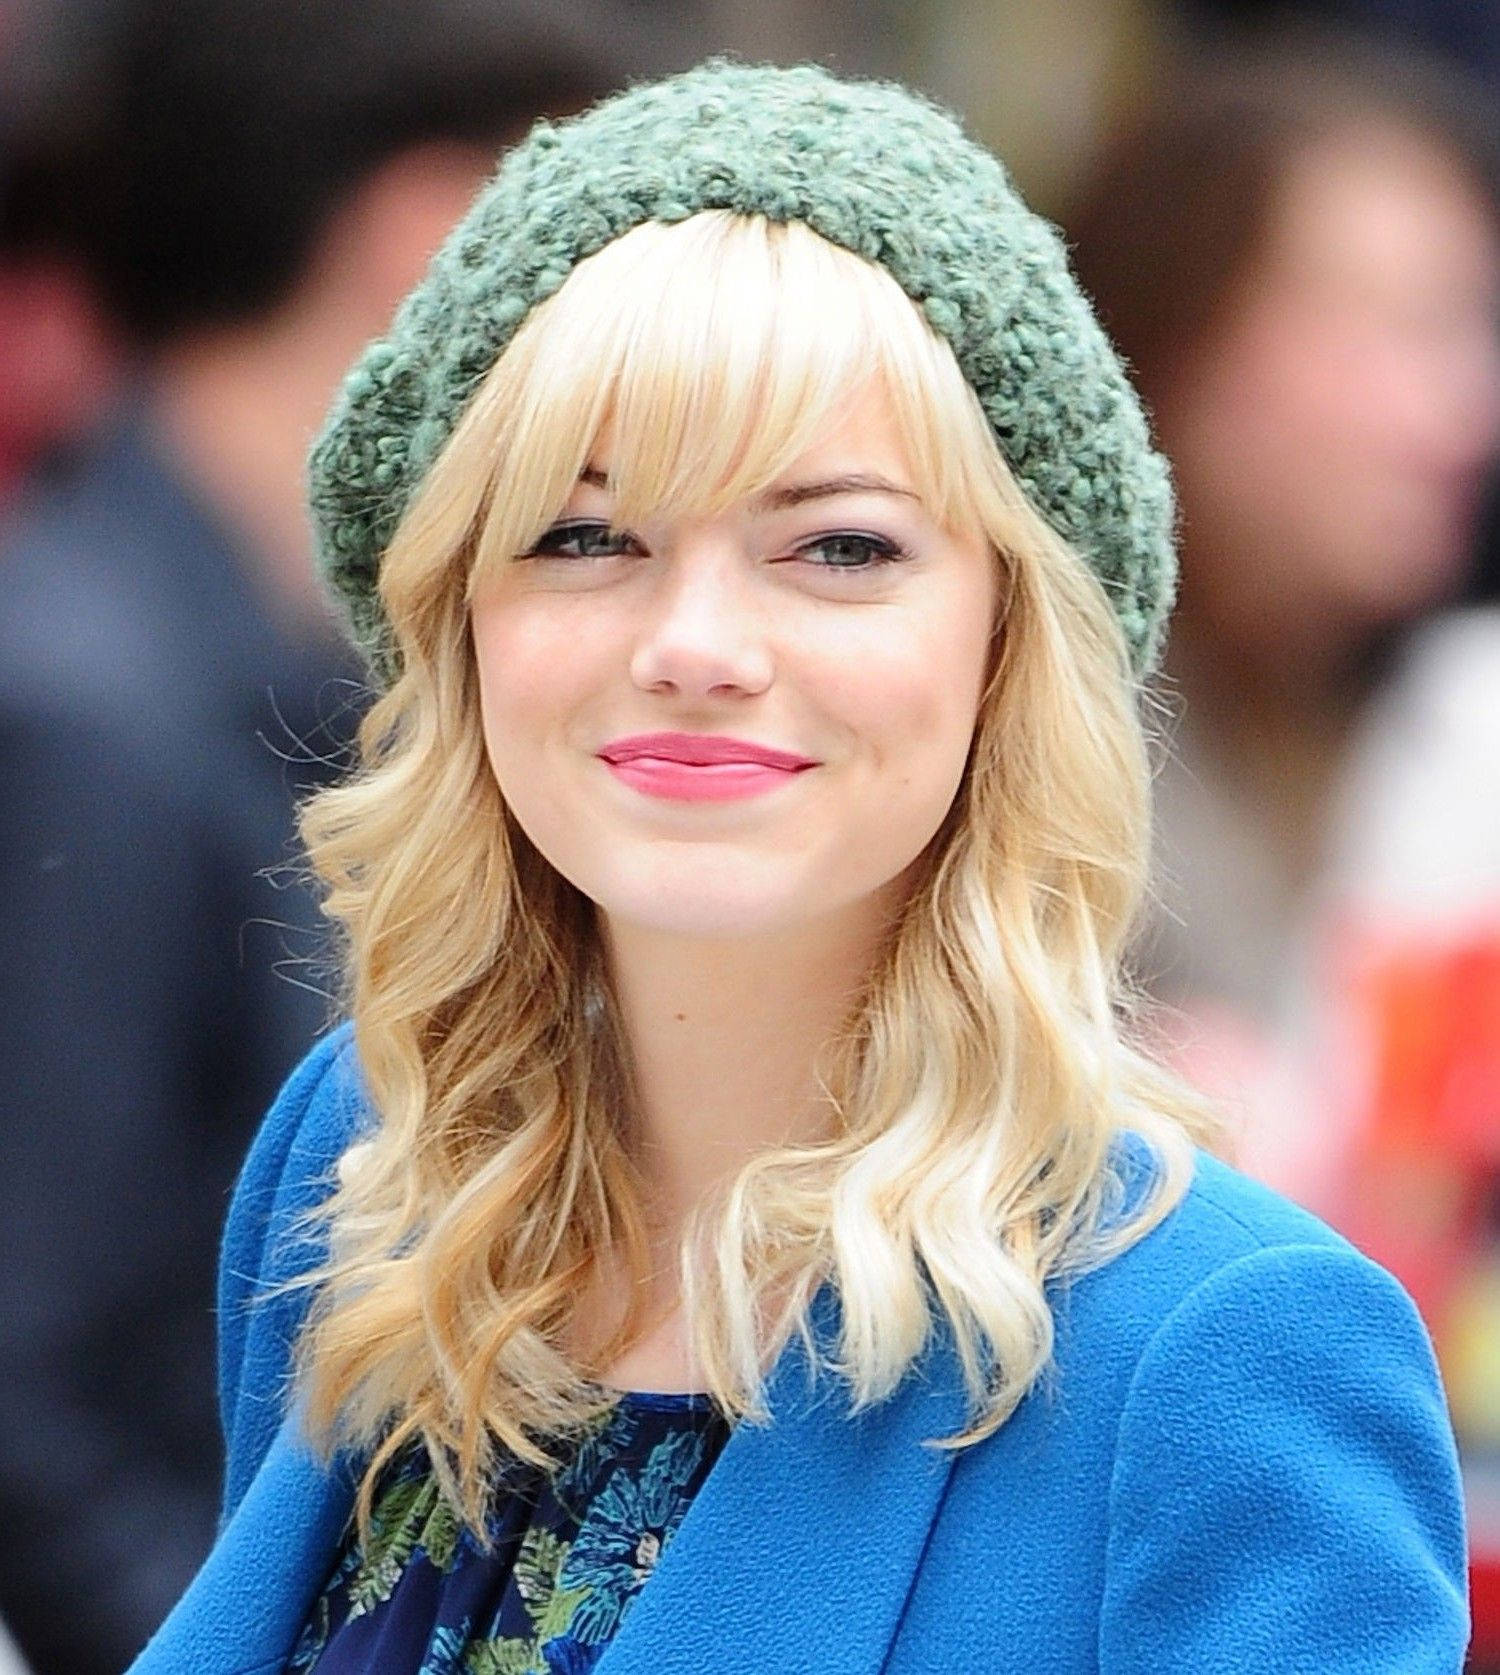 Emma Stone With Green Beret